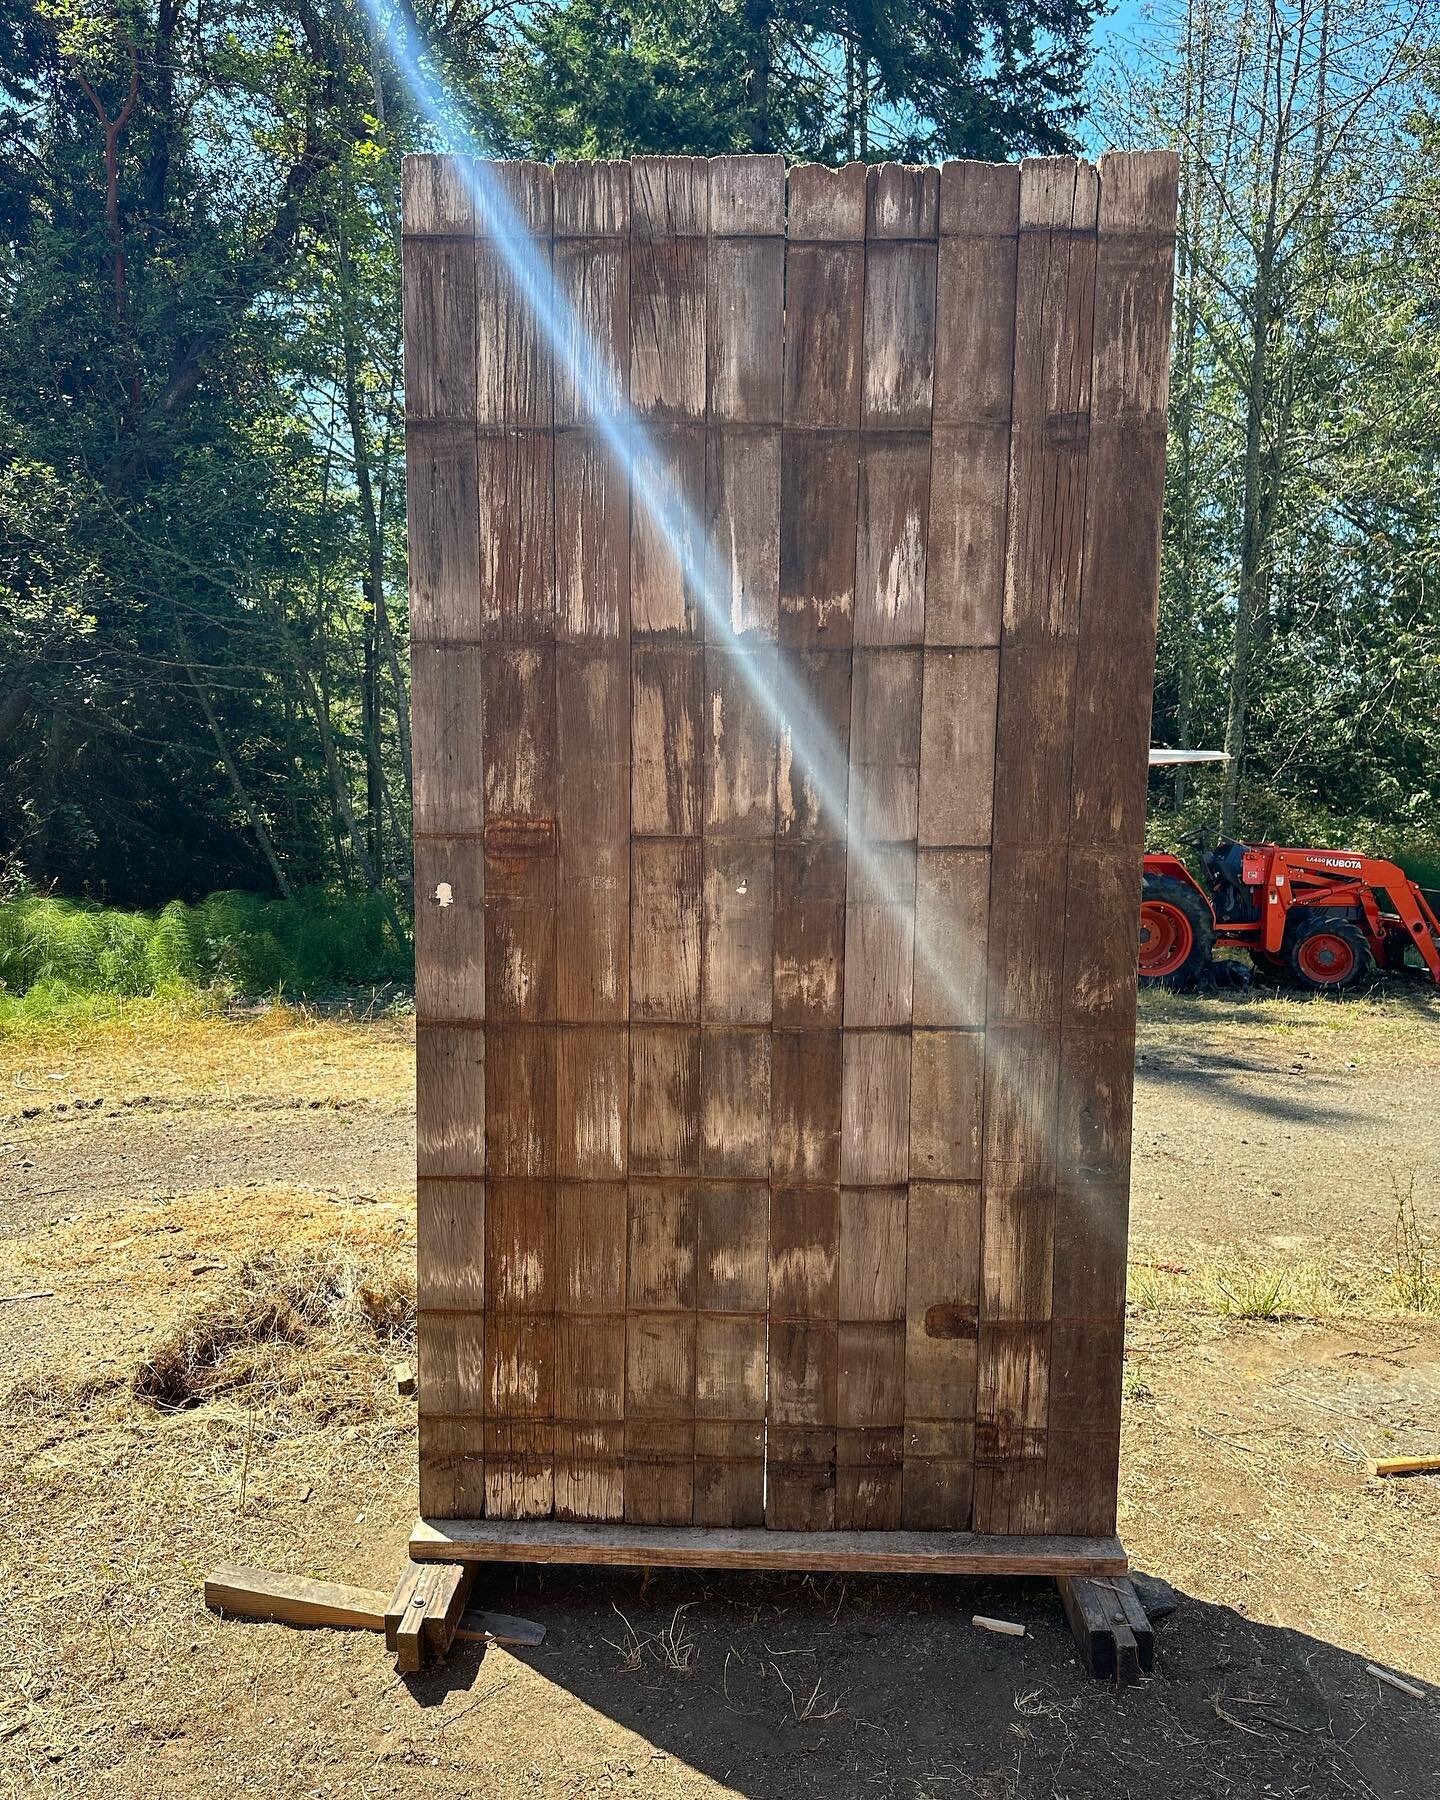 She stands gracefully now, and with ease.  A salvaged water tank made from old growth redwood - the sun beam a bonus just as I finished. 

This wall is part of my outdoor installation for the Orcas Island studio tour . All details in the earlier post